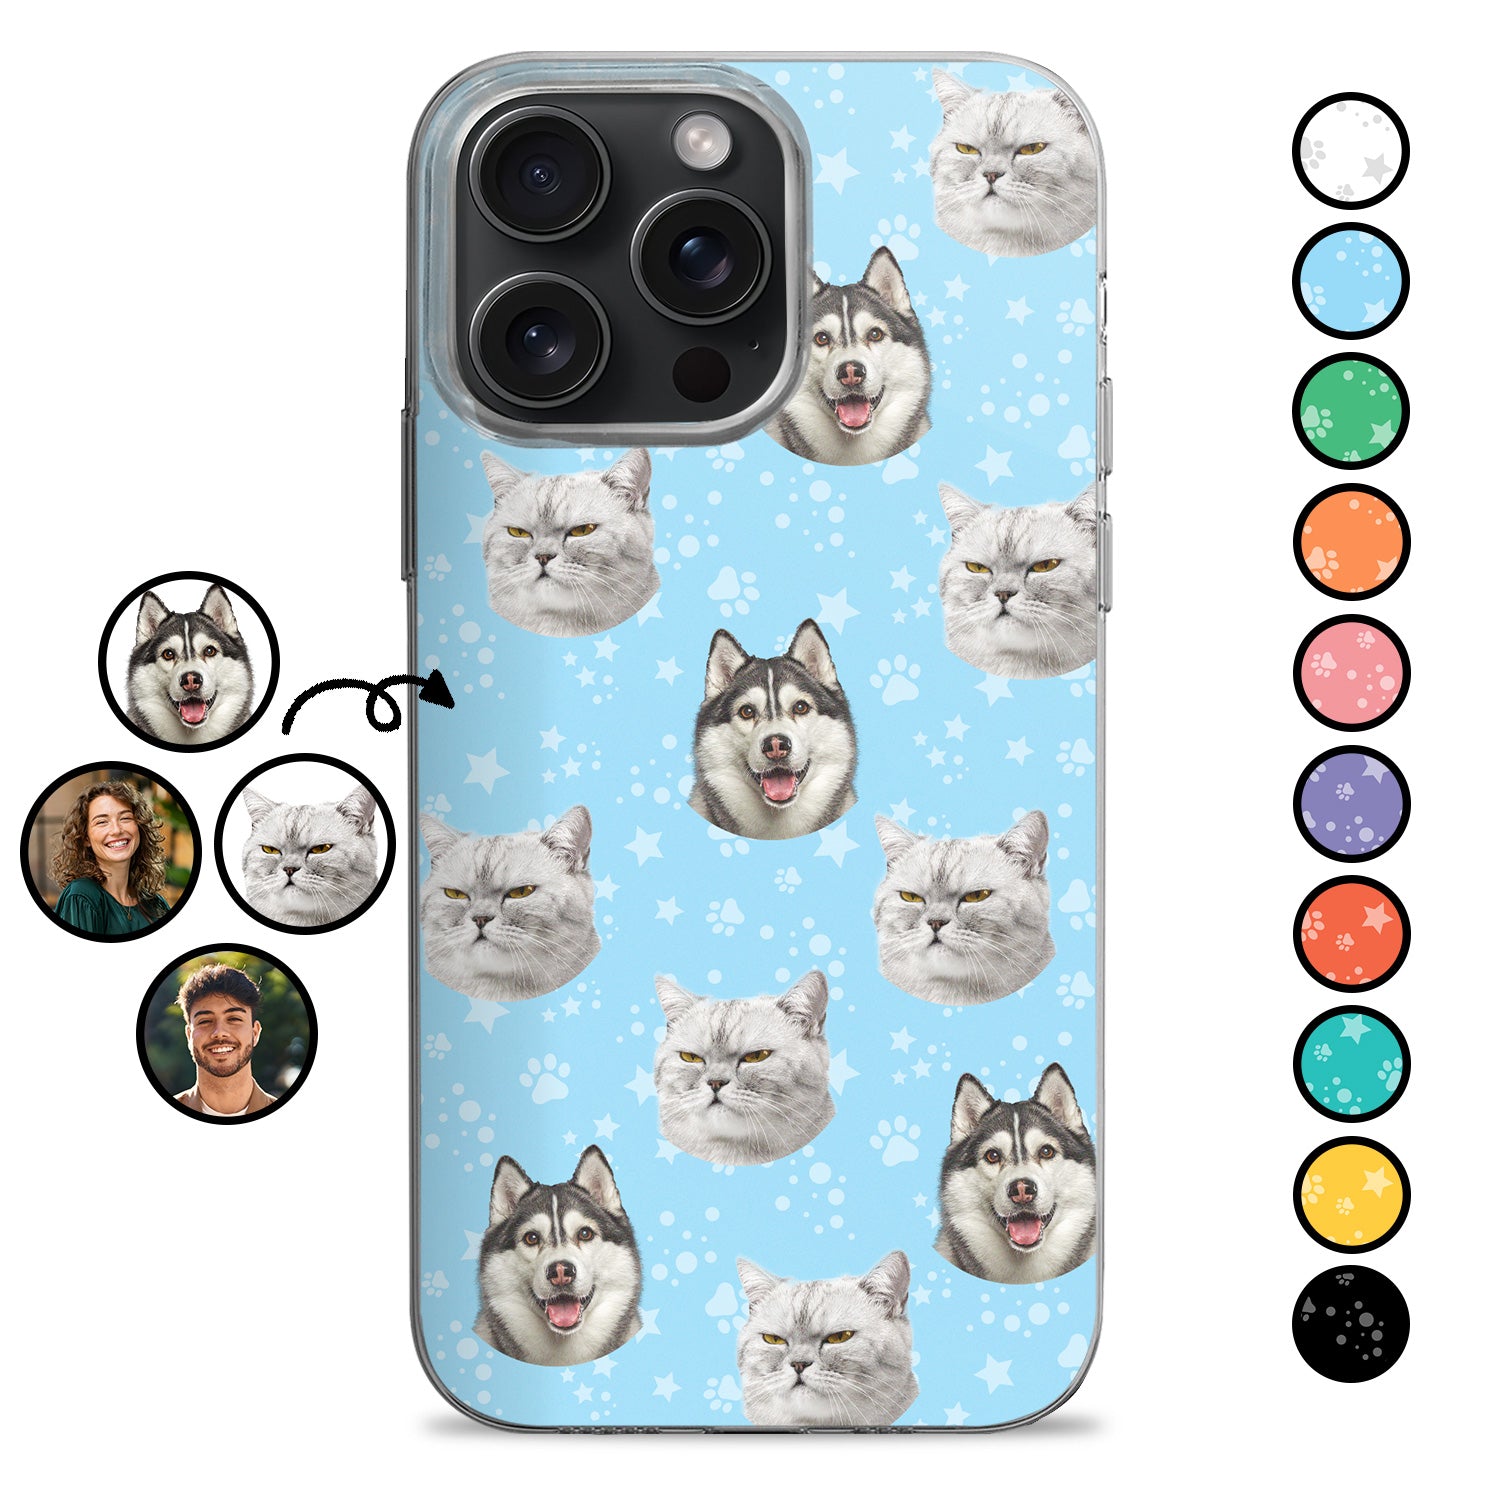 Custom Photo Pet Faces Human Faces - Gift For Dog Lovers, Cat Lovers, Men, Women - Personalized Clear Phone Case